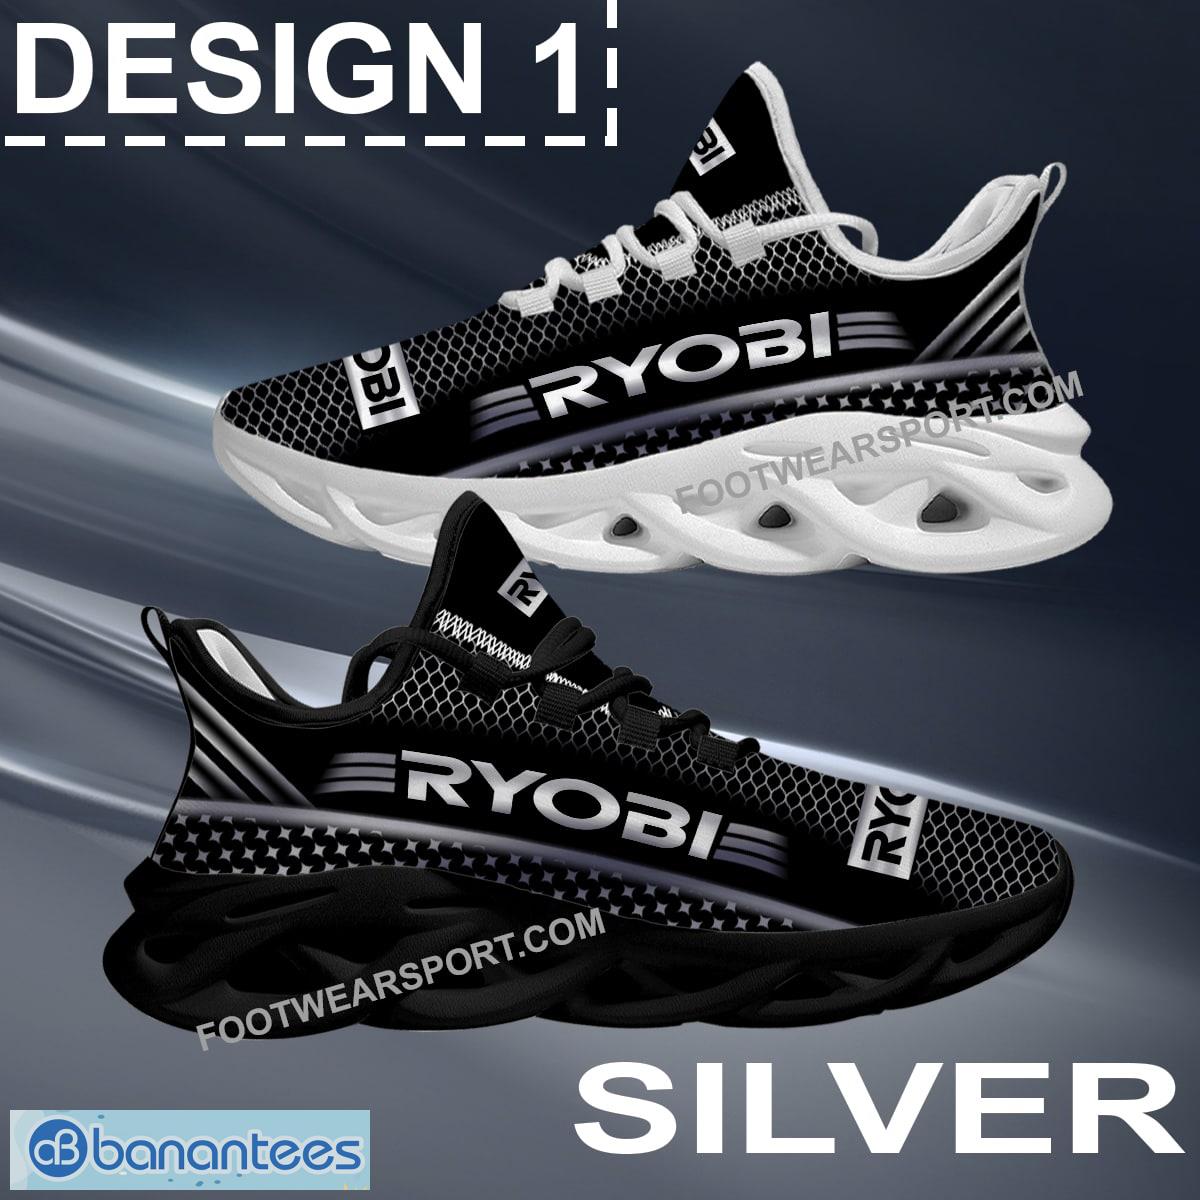 Power Tools Ryobi Max Soul Shoes Gold, Diamond, Silver All Over Print Style Sport Sneaker Gift - Brand Power Tools Ryobi Max Soul Shoes Style 1